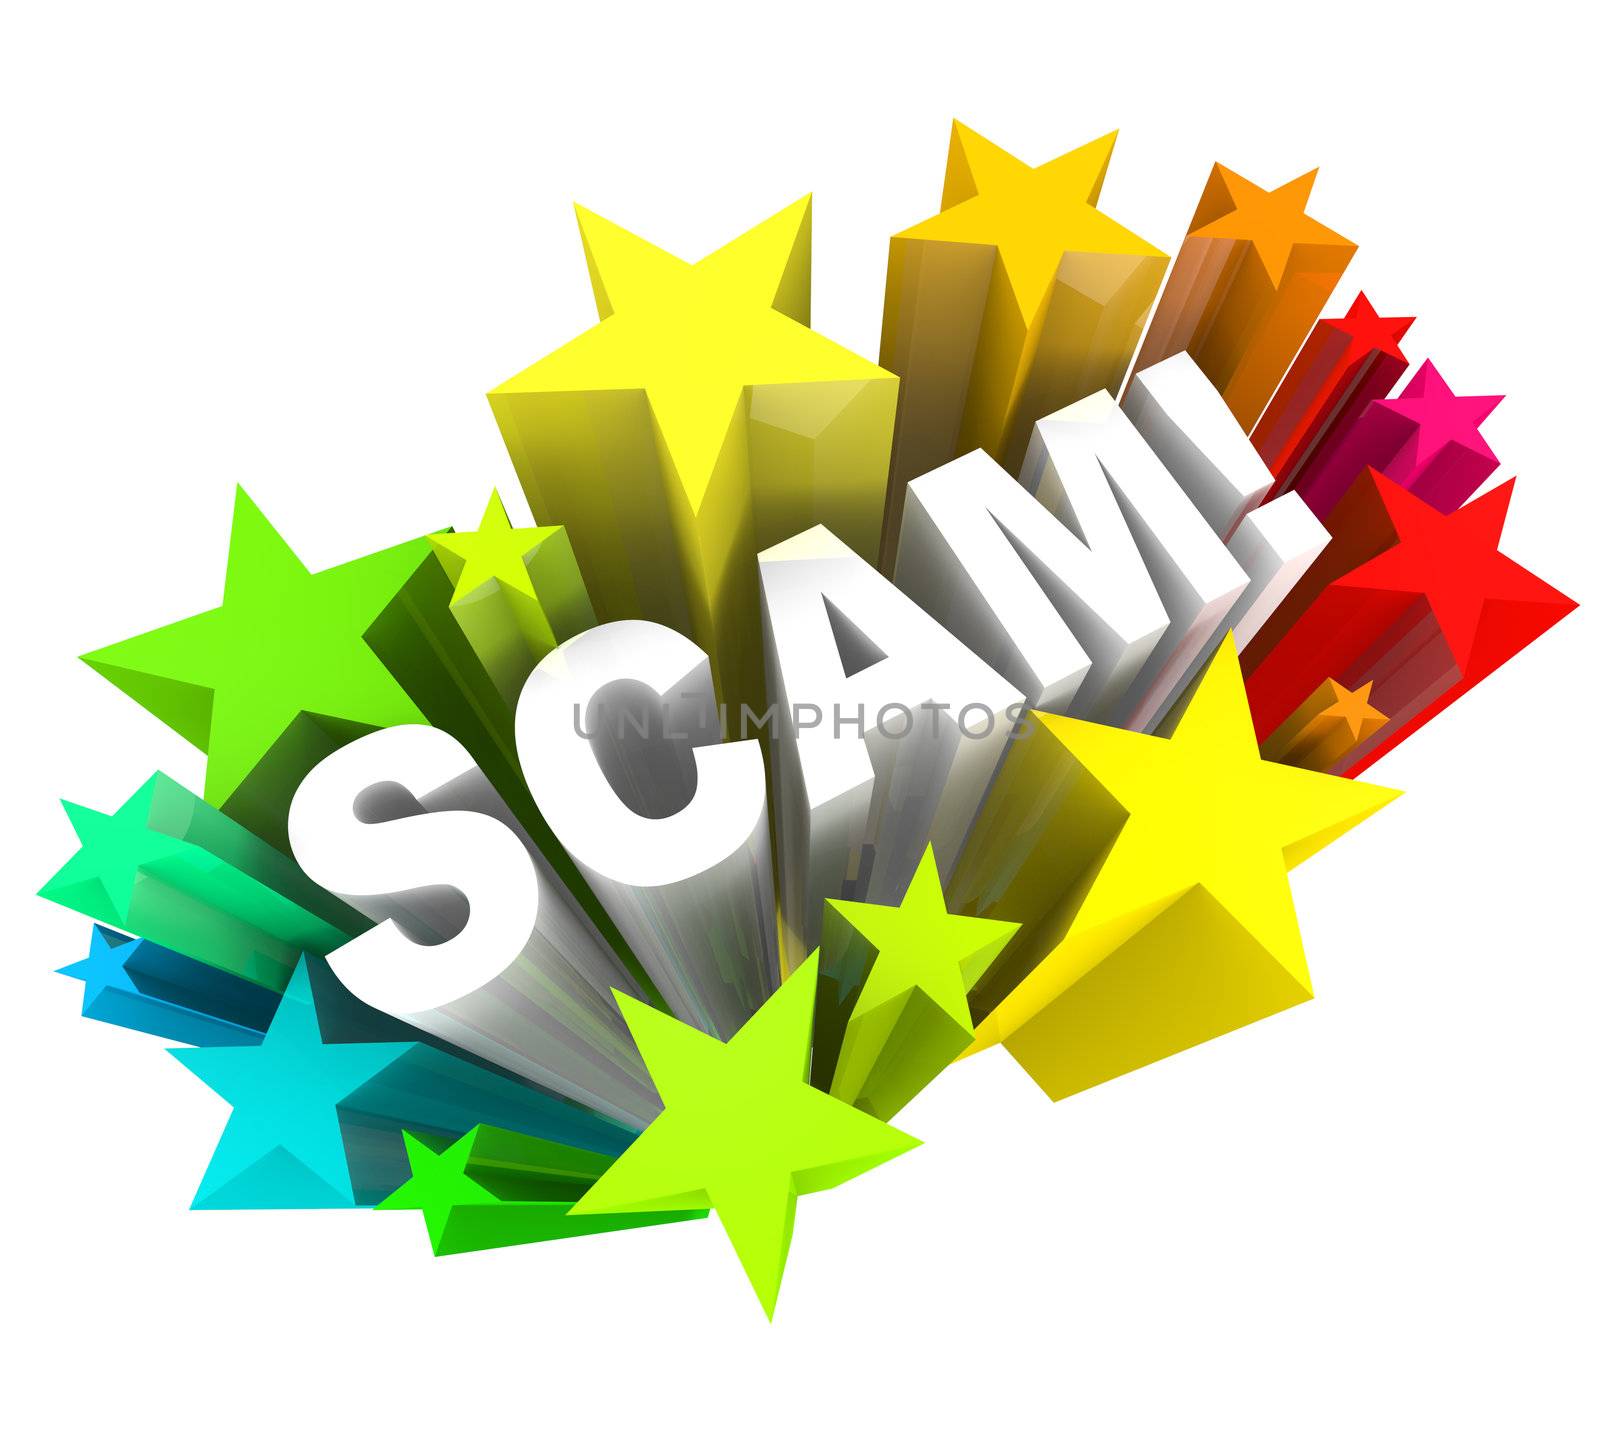 The word Scam surrounded by a starburst and fireworks to represent the surprise of a con, deceit, swindle, rip-off, or cheat such as on a shady infomercial or from a huckster salesperson